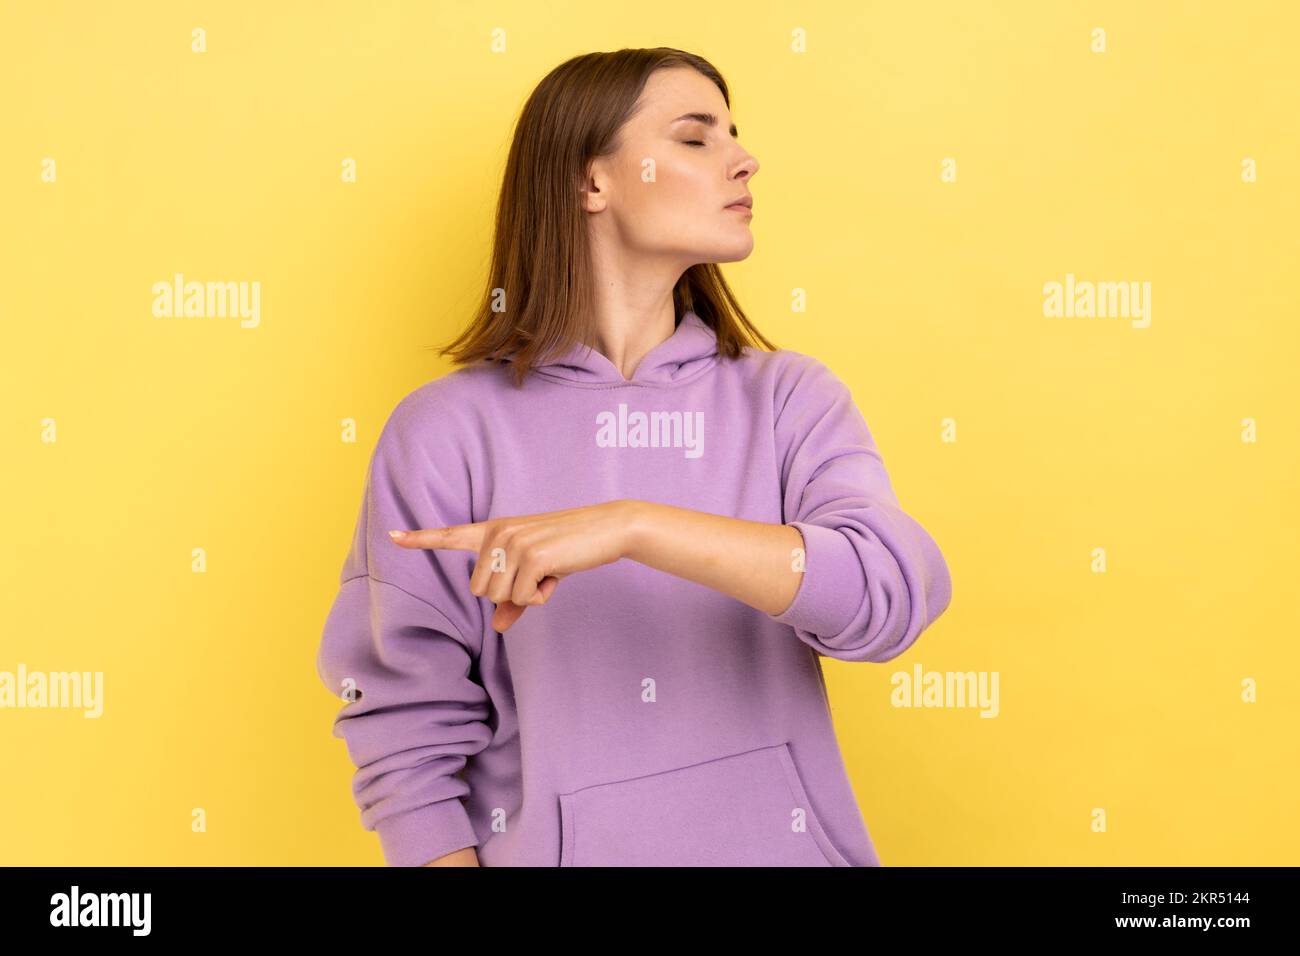 Get out. Portrait of upset vexed woman showing exit, demanding to leave her alone, has resentful irritated expression, wearing purple hoodie. Indoor studio shot isolated on yellow background. Stock Photo